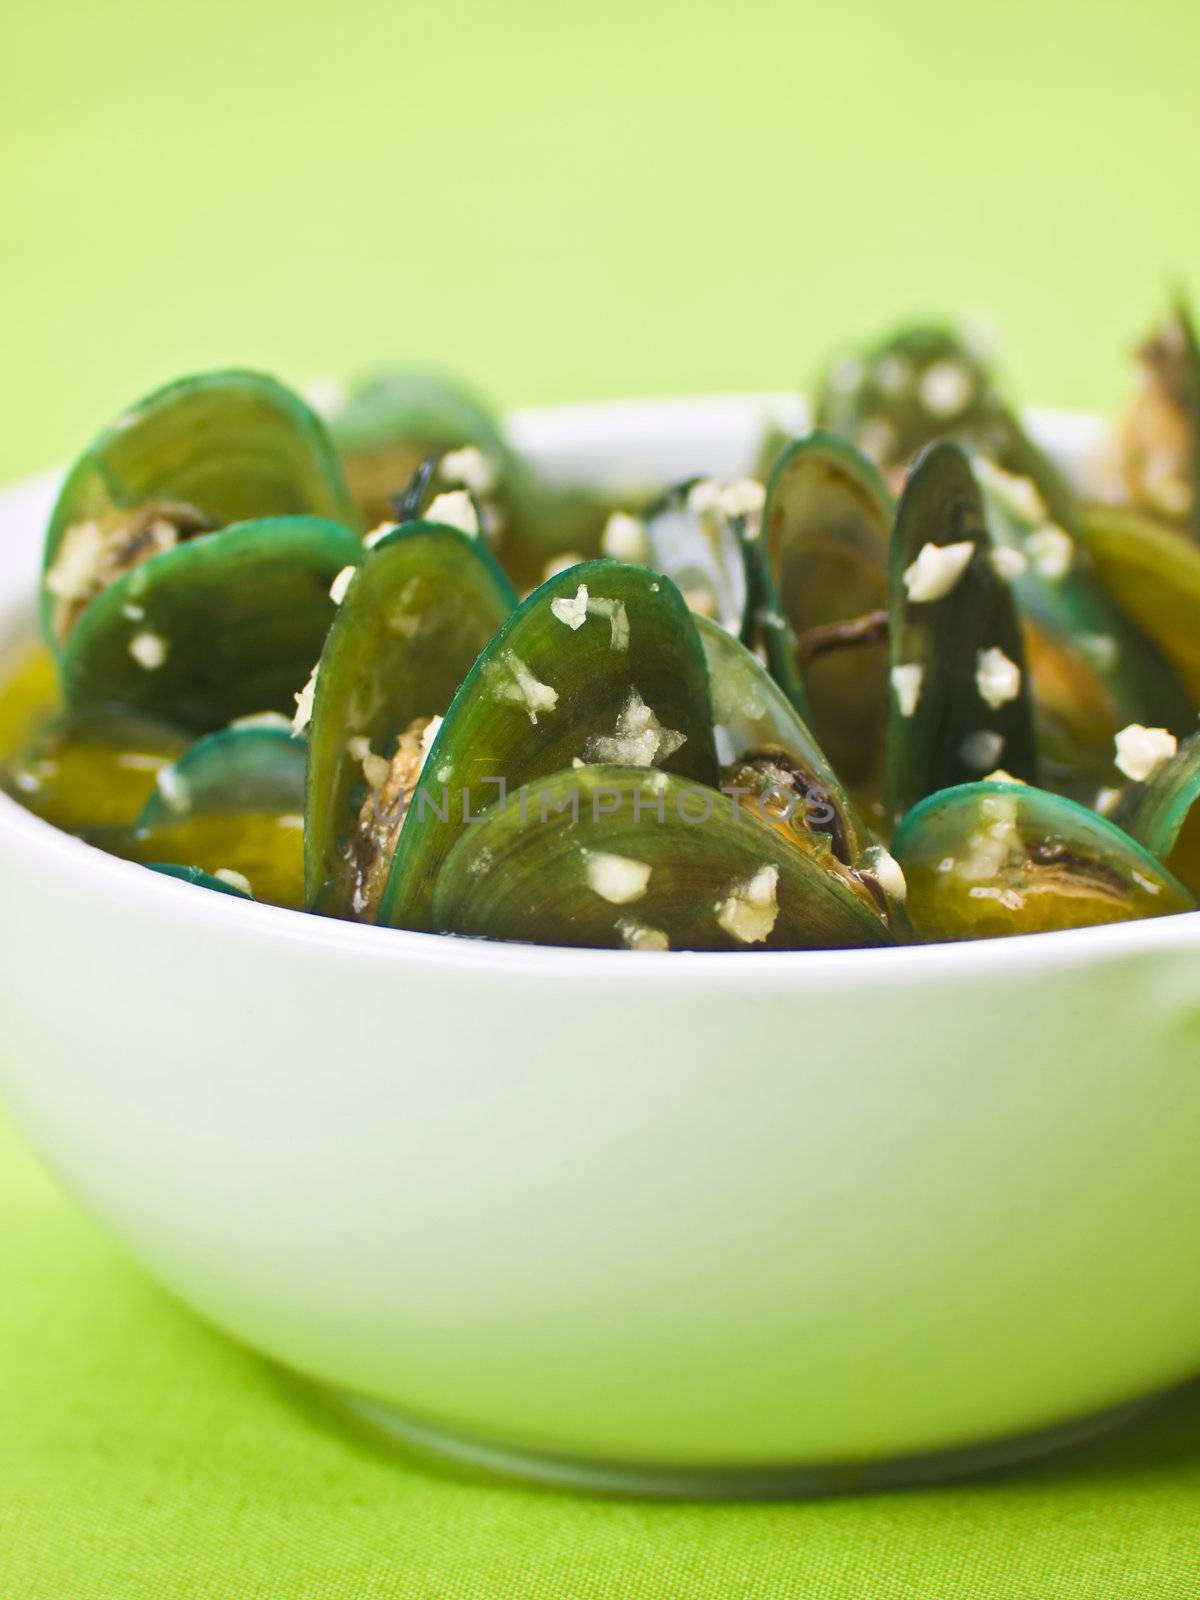 green mussels in garlic sauce by zkruger